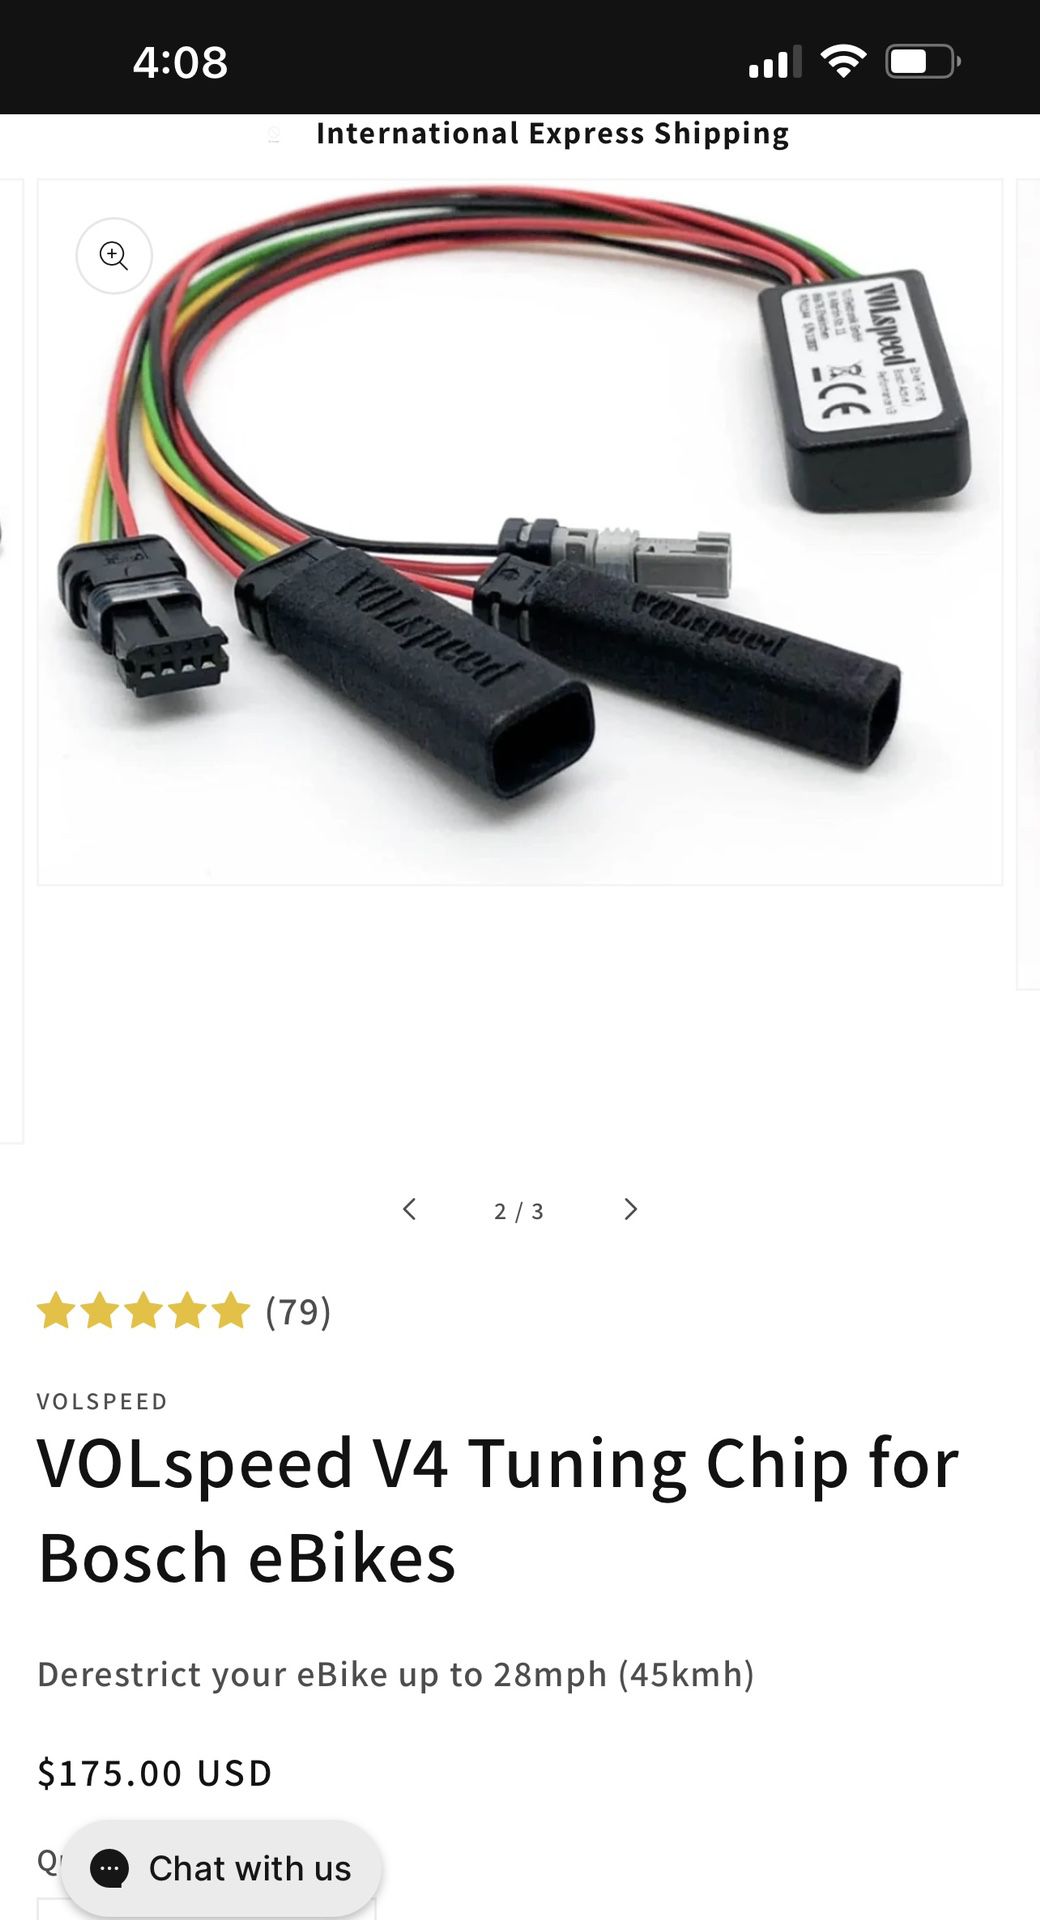 VOLspeed V4 Tuning Chip For Bosch eBikes for Sale in Santa Ana, CA - OfferUp